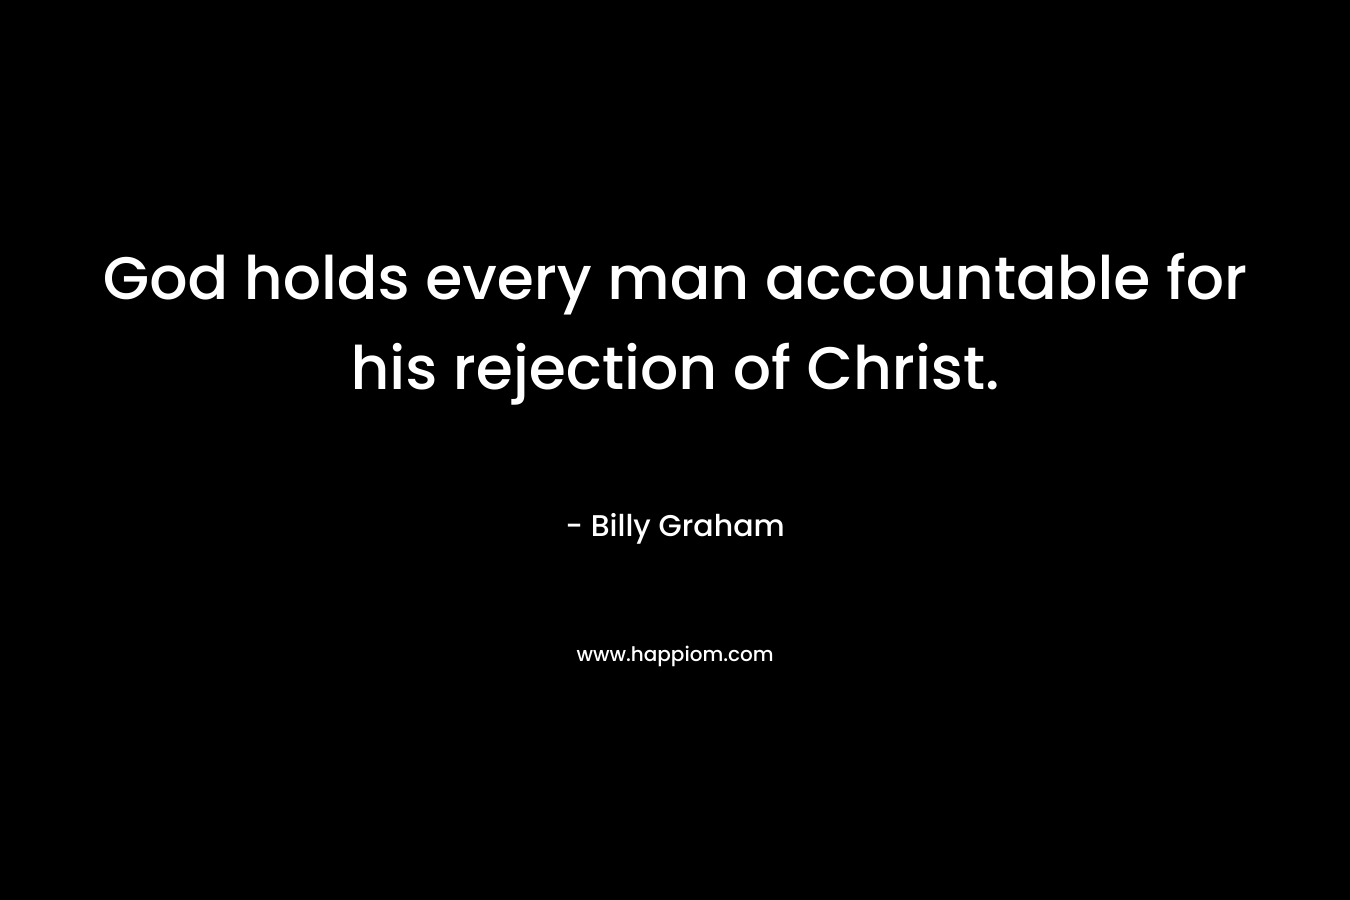 God holds every man accountable for his rejection of Christ.